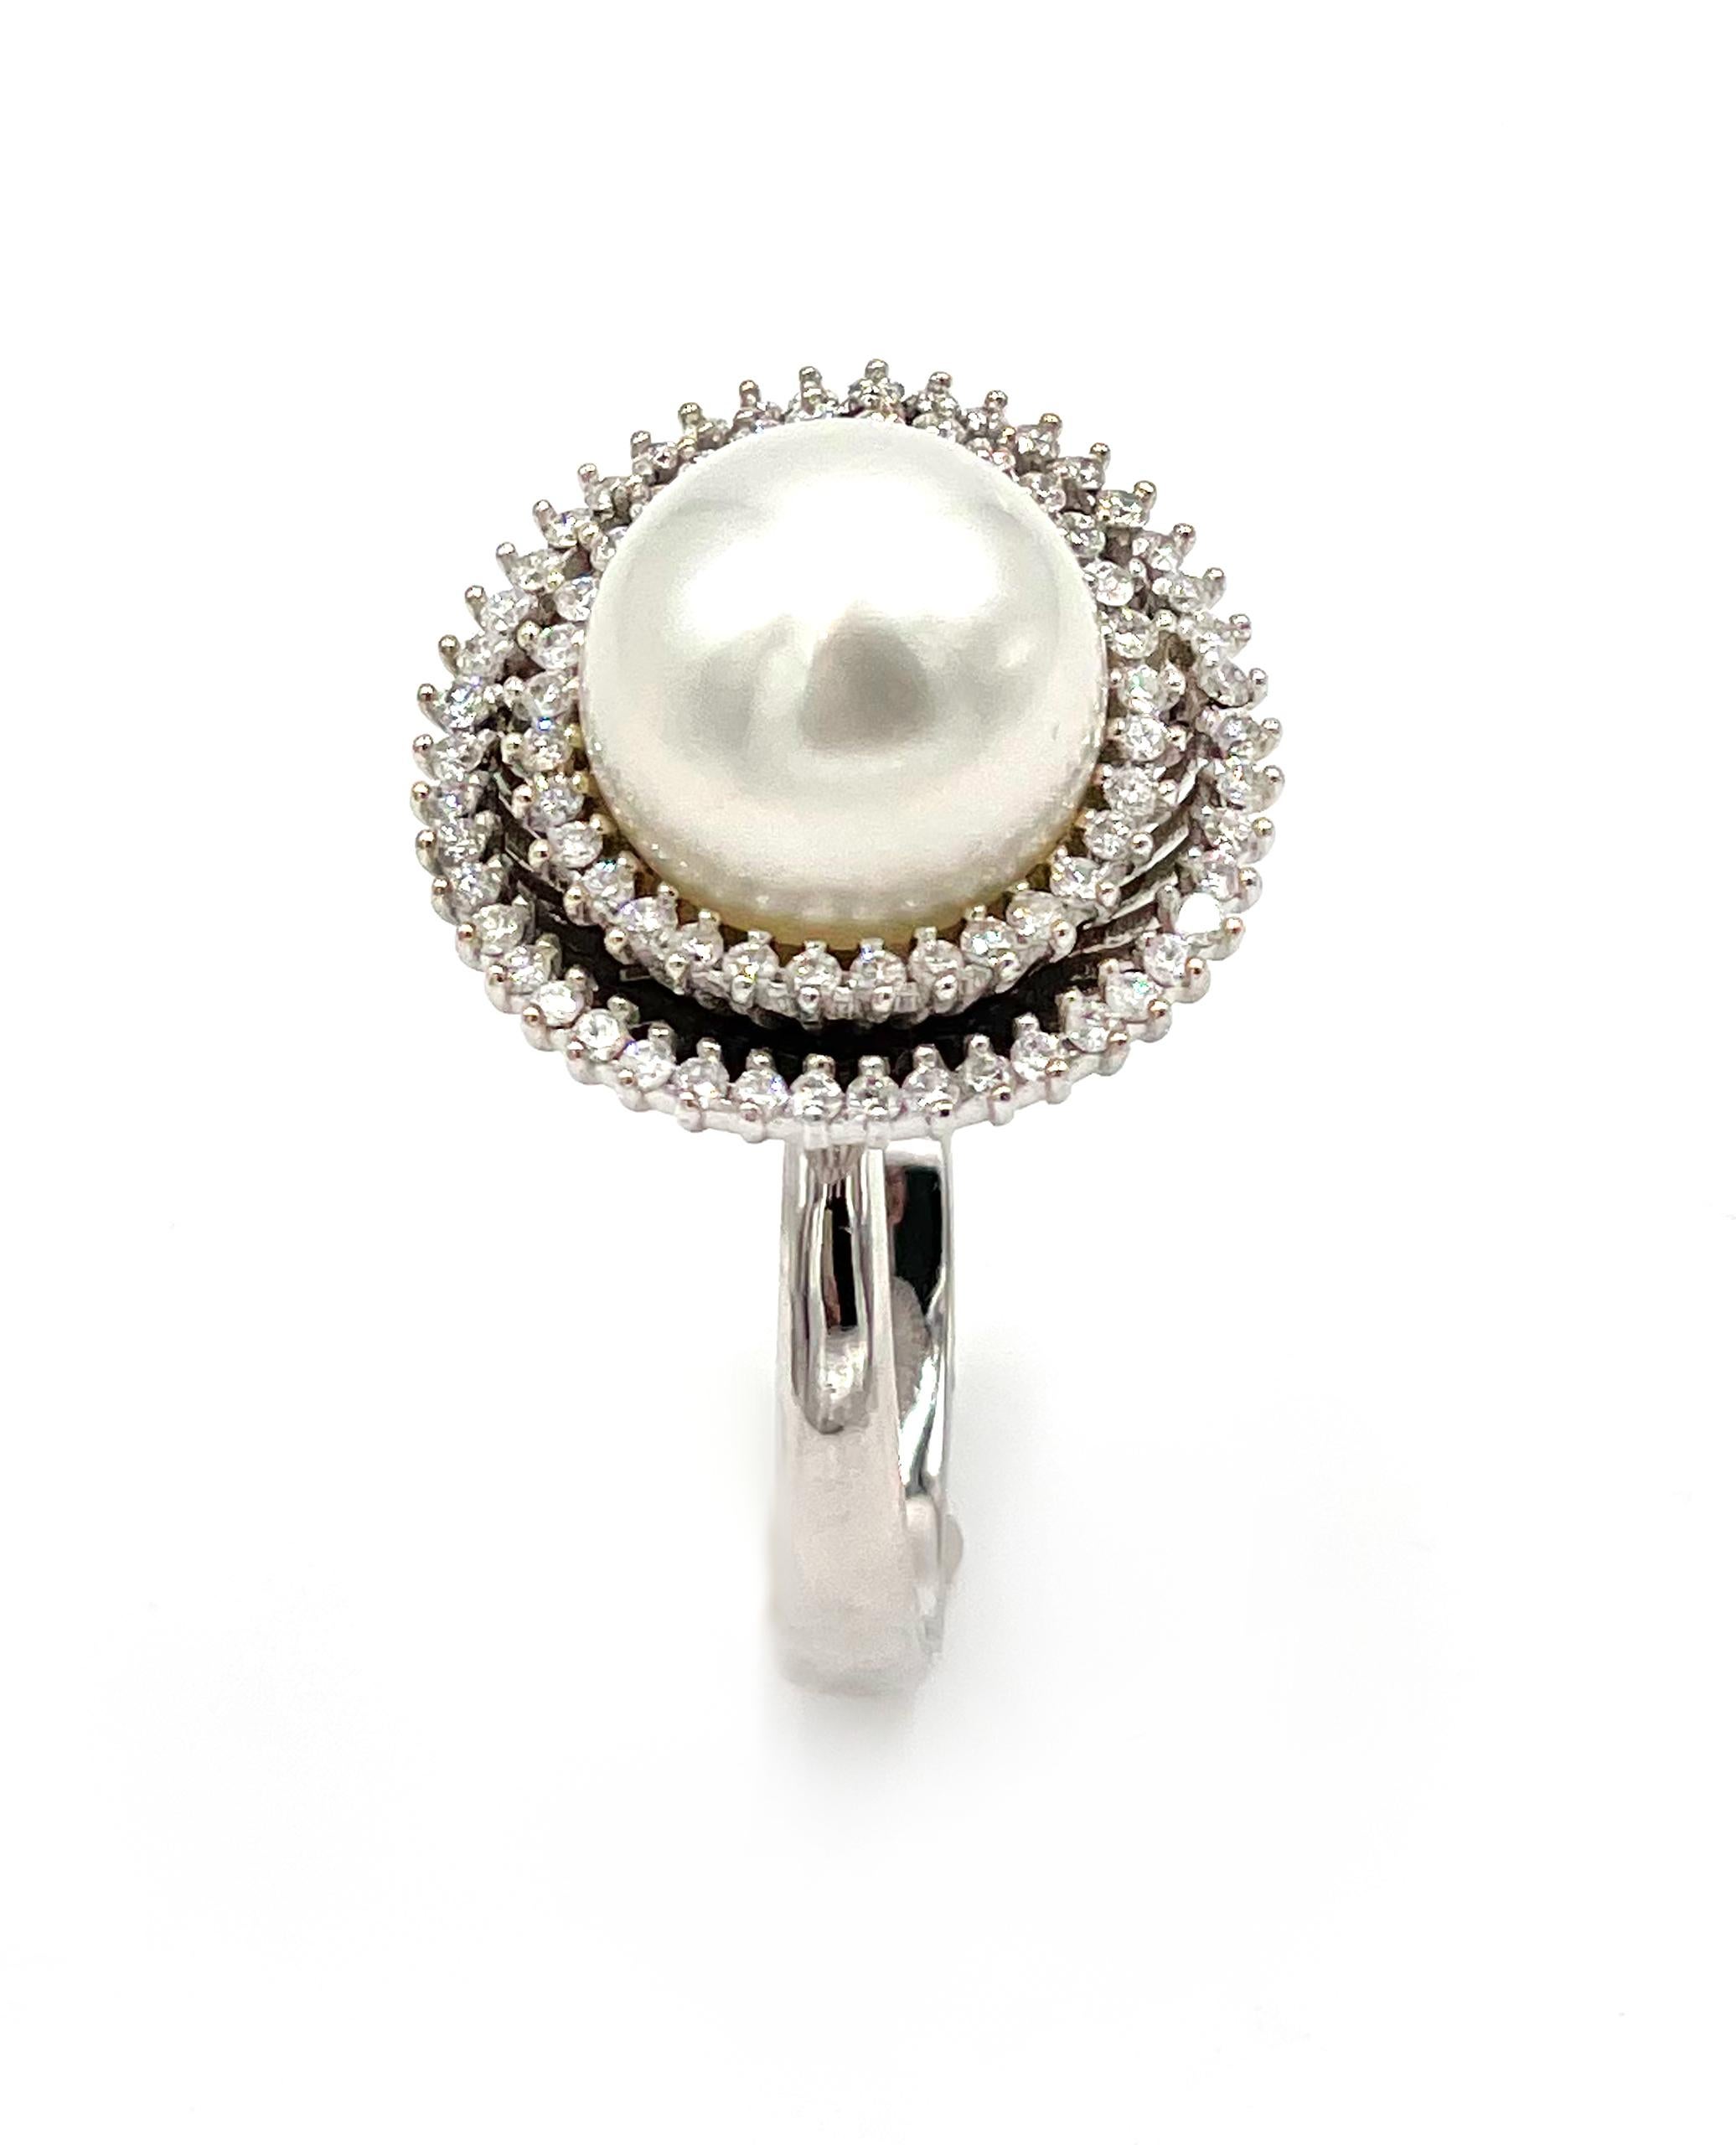 18K White Gold Ring with 76 Round Diamonds 0.60 carat and One Center 11.8mm South Sea Pearl. 

* Finger size 6.75 